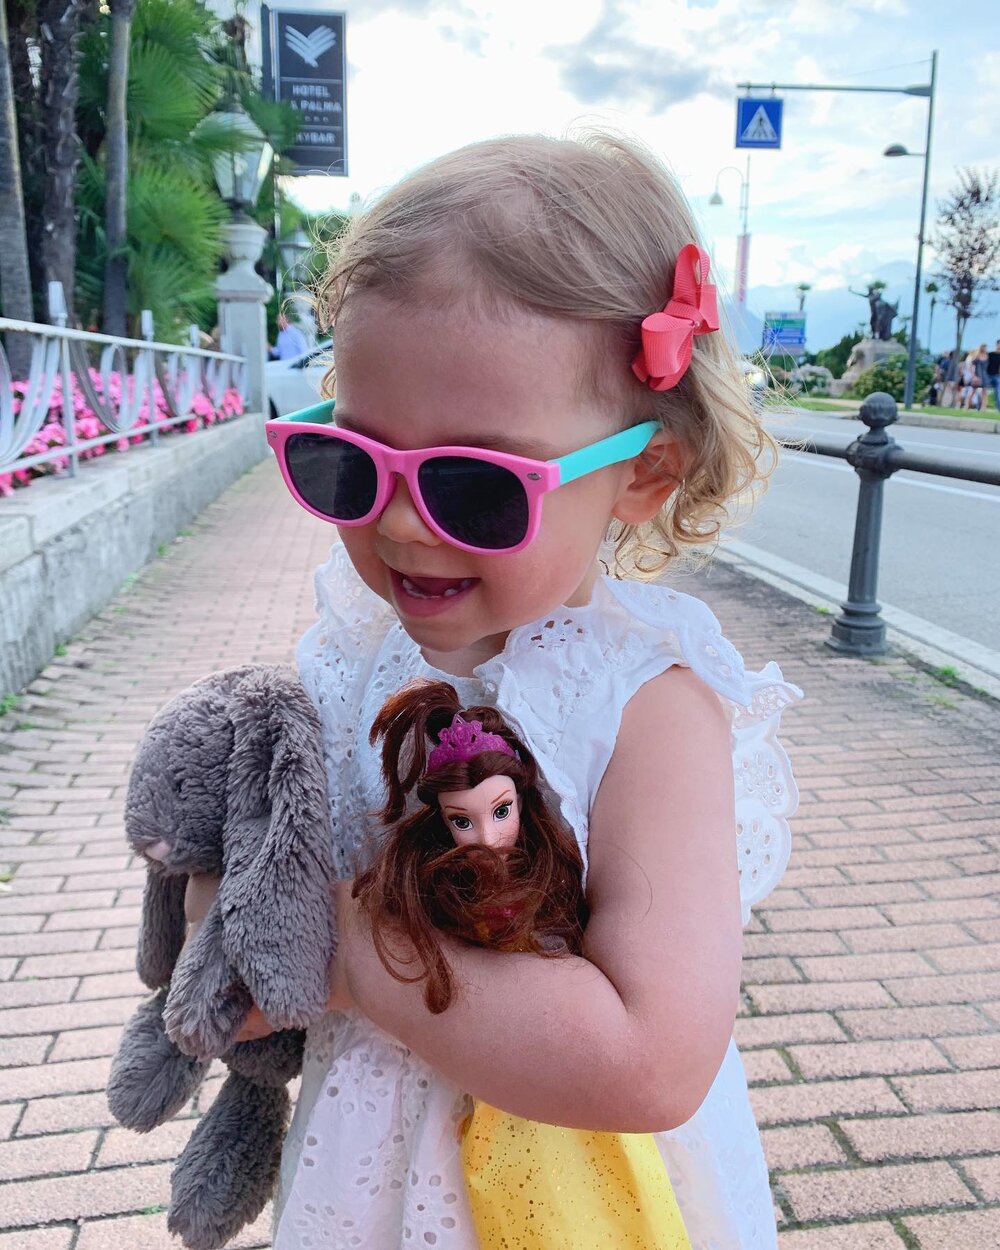 Barbies &amp; bunnies. She is literally the cutest thing in the world.

#lagomaggiore #roadtrip #travelingwithatoddler #expatlife